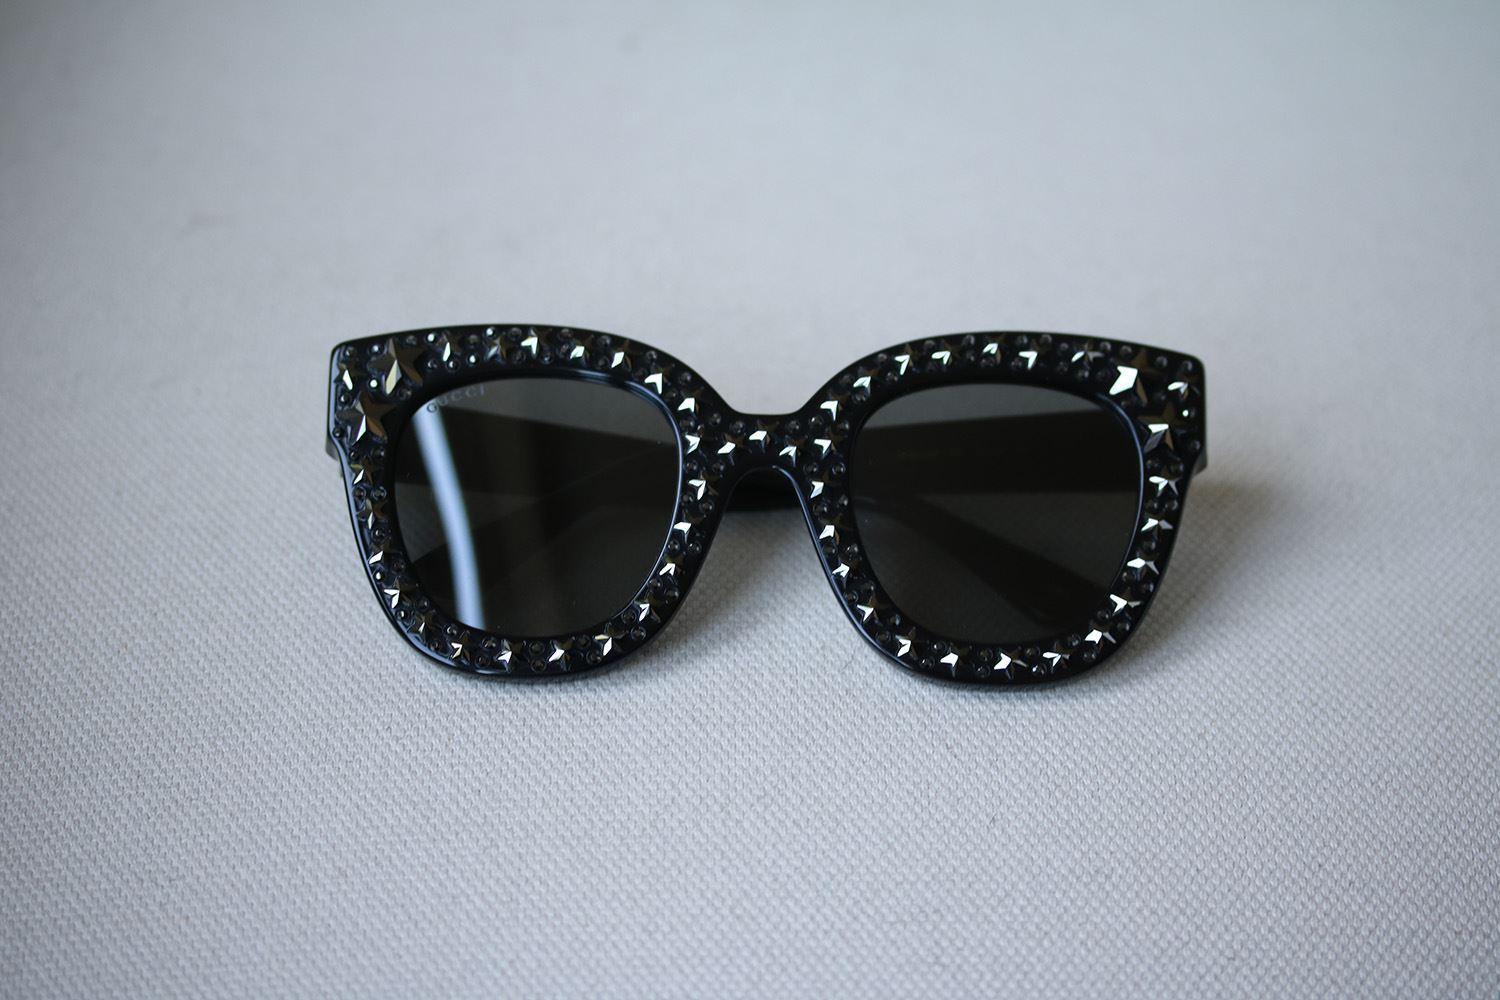 Black acetate frame with silver star-shaped crystals. Black acetate temples with silver star-shaped crystals and metal interlocking G. Grey lens. 100% UVA/UVB protection. Made in Italy.

Lens size - 49 mm
Arm size - 140 mm
Bridge size - 28